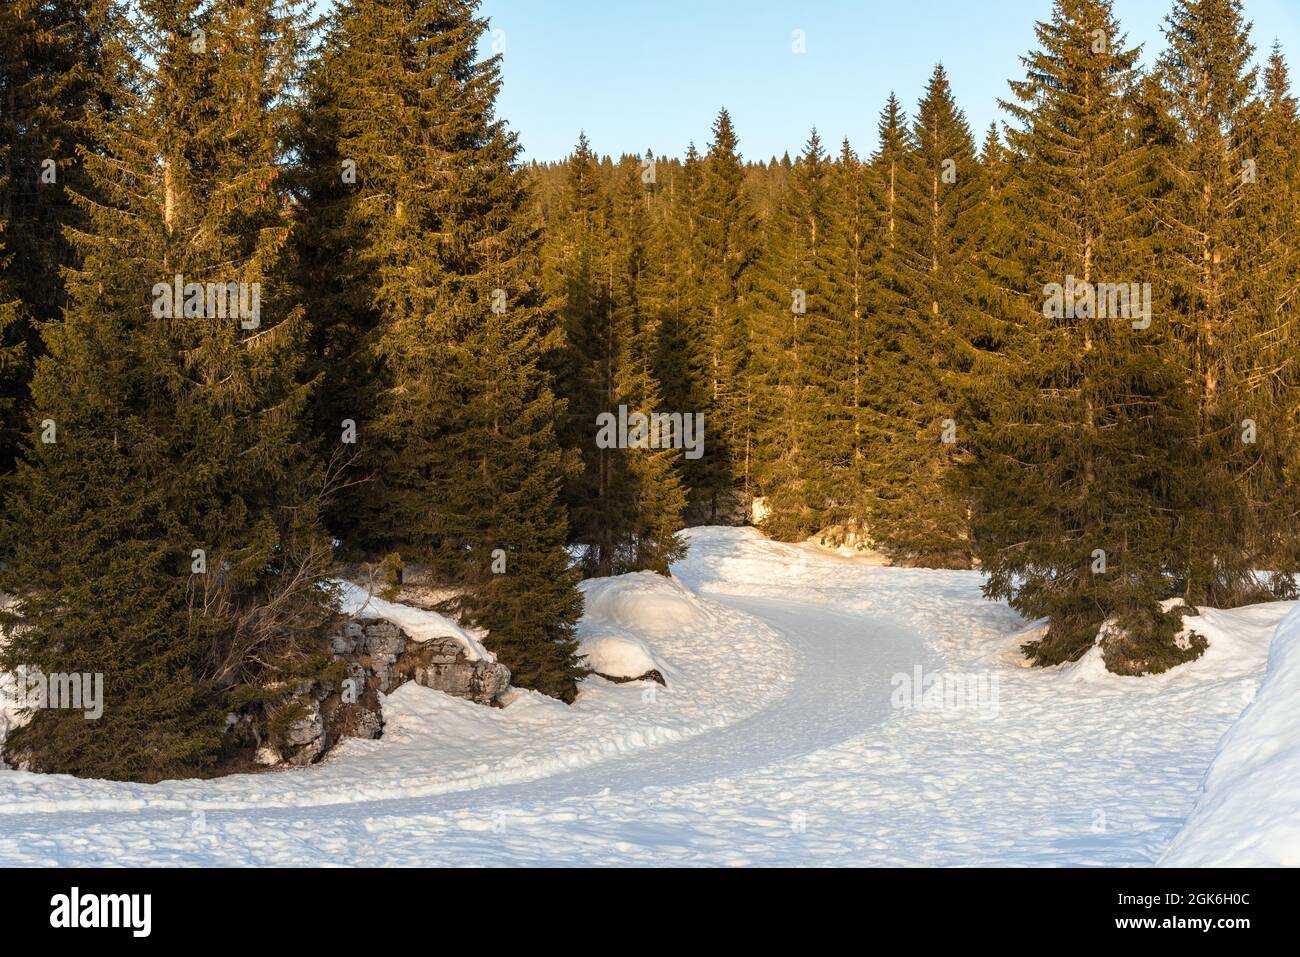 Empty winding snowy path through a pine forest in the mountains at sunset Stock Photo